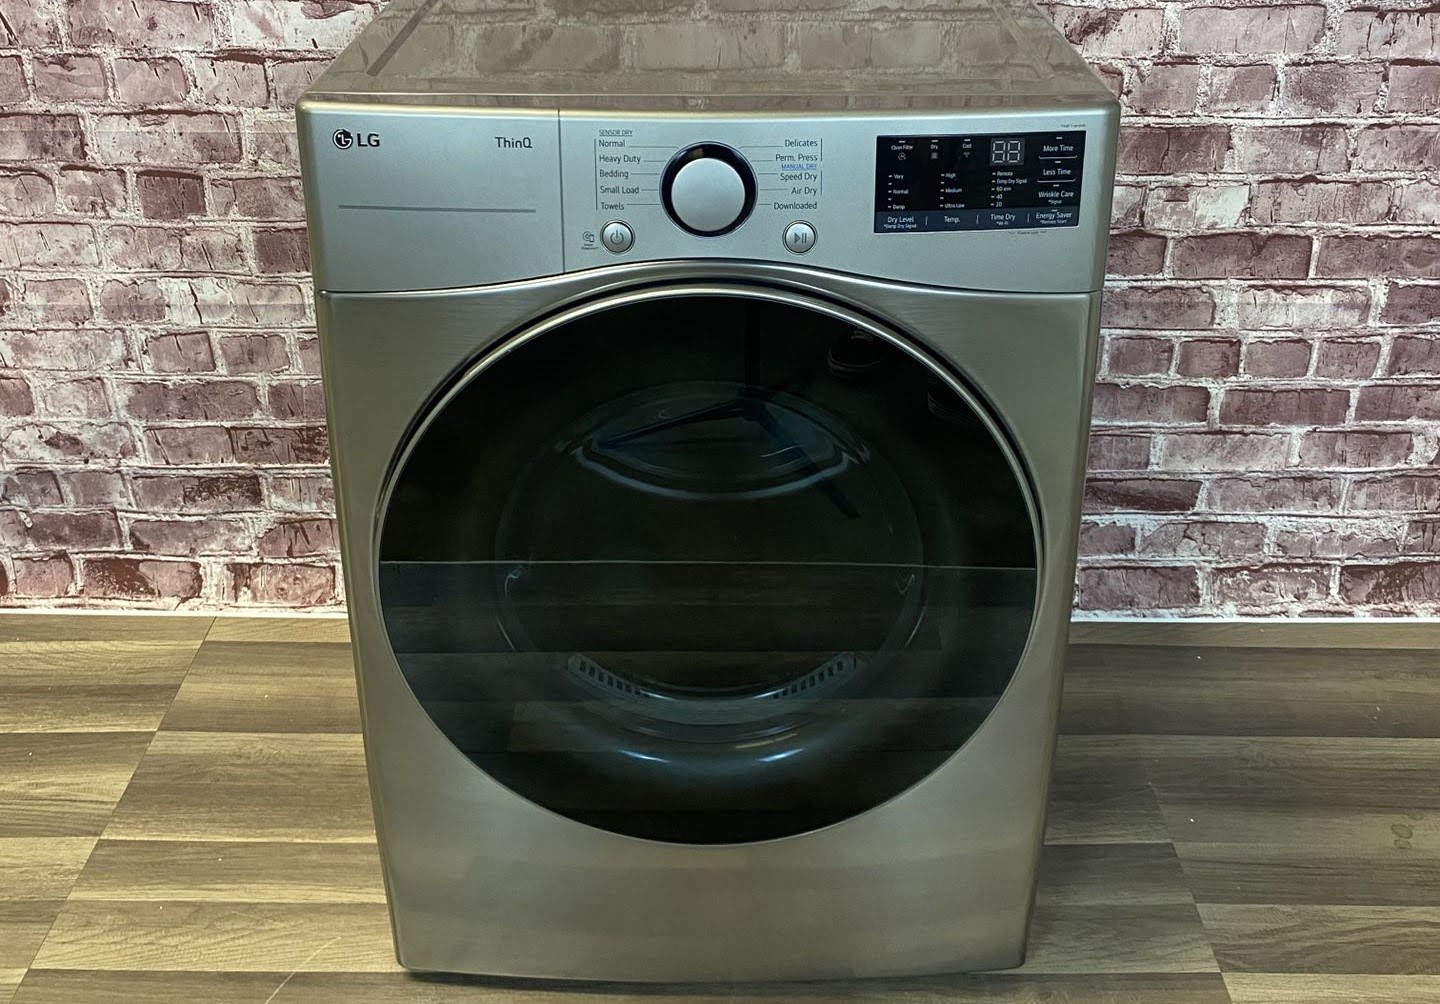 How To Fix The Error Code TO For LG Dryer